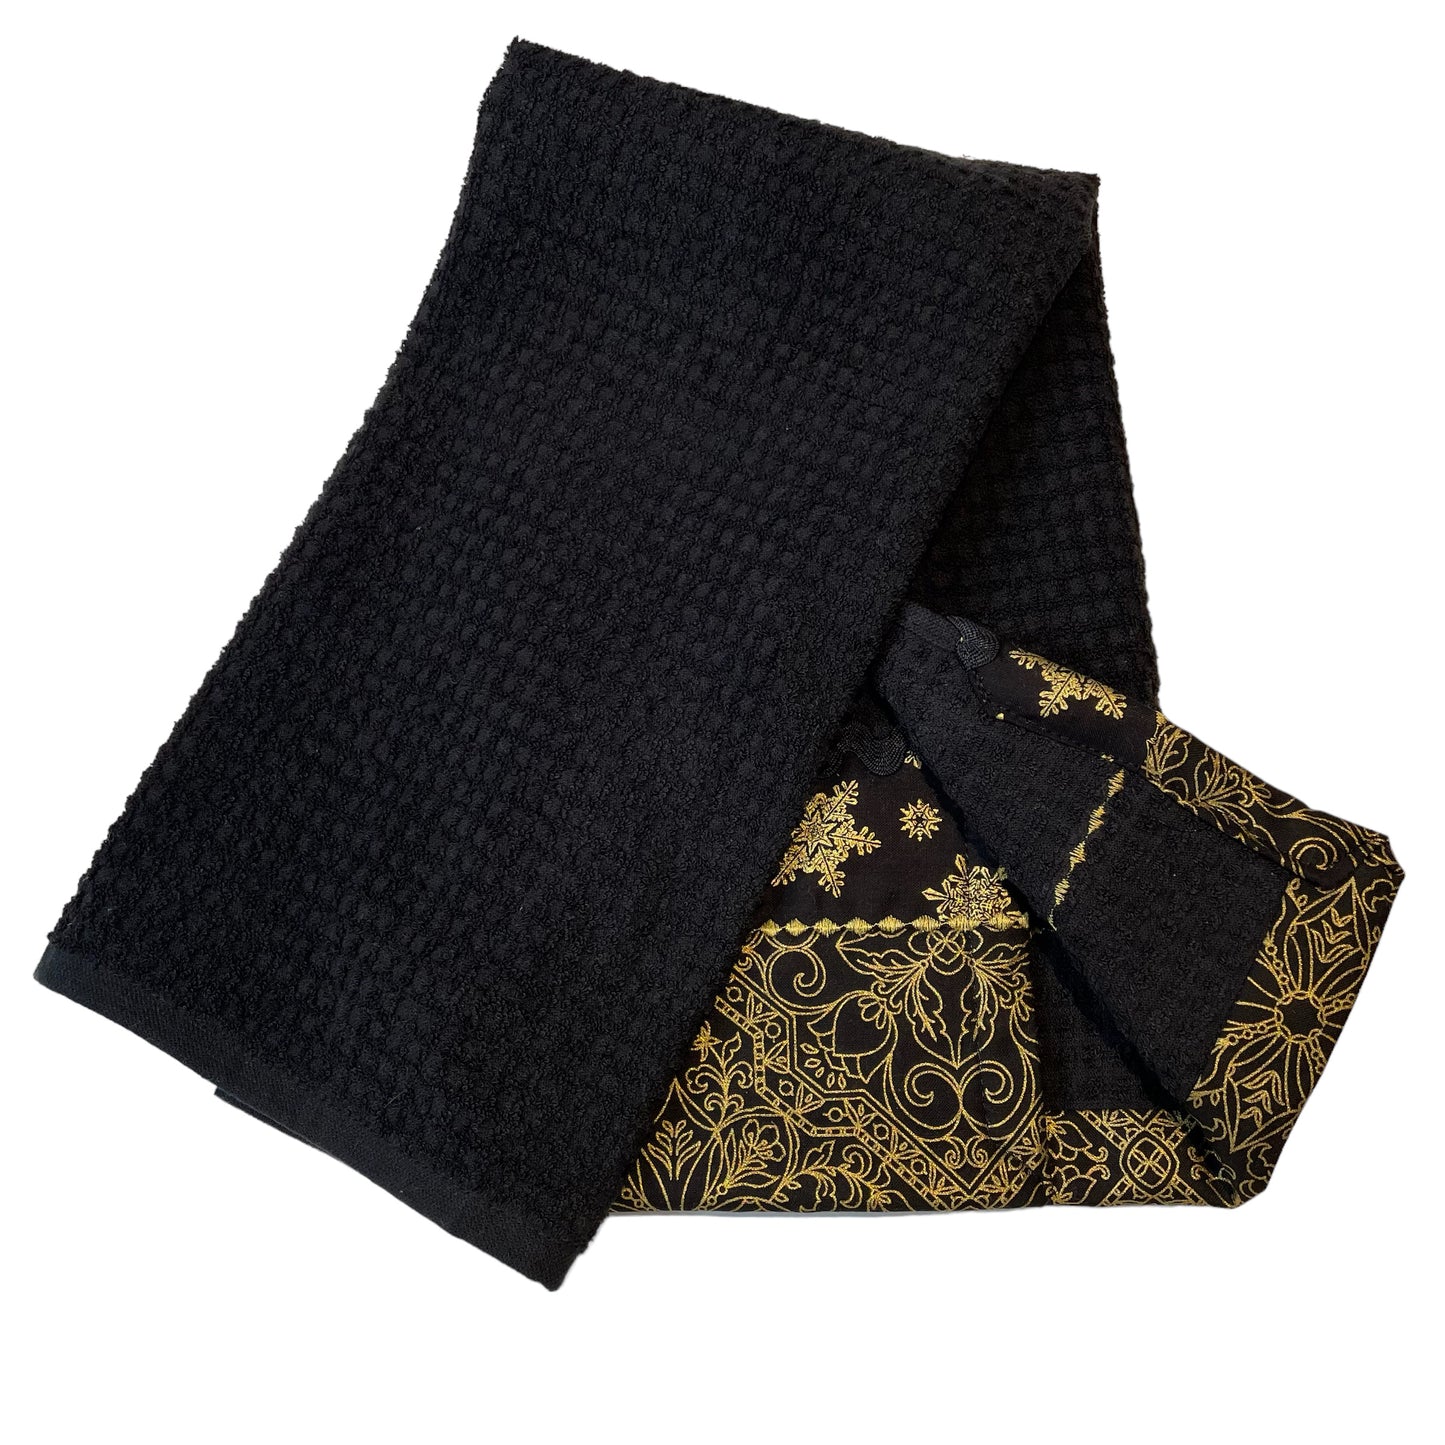 Black & Gold Christmas Dish Towel with Ricrac Trim and Gold Embroidery Stitching